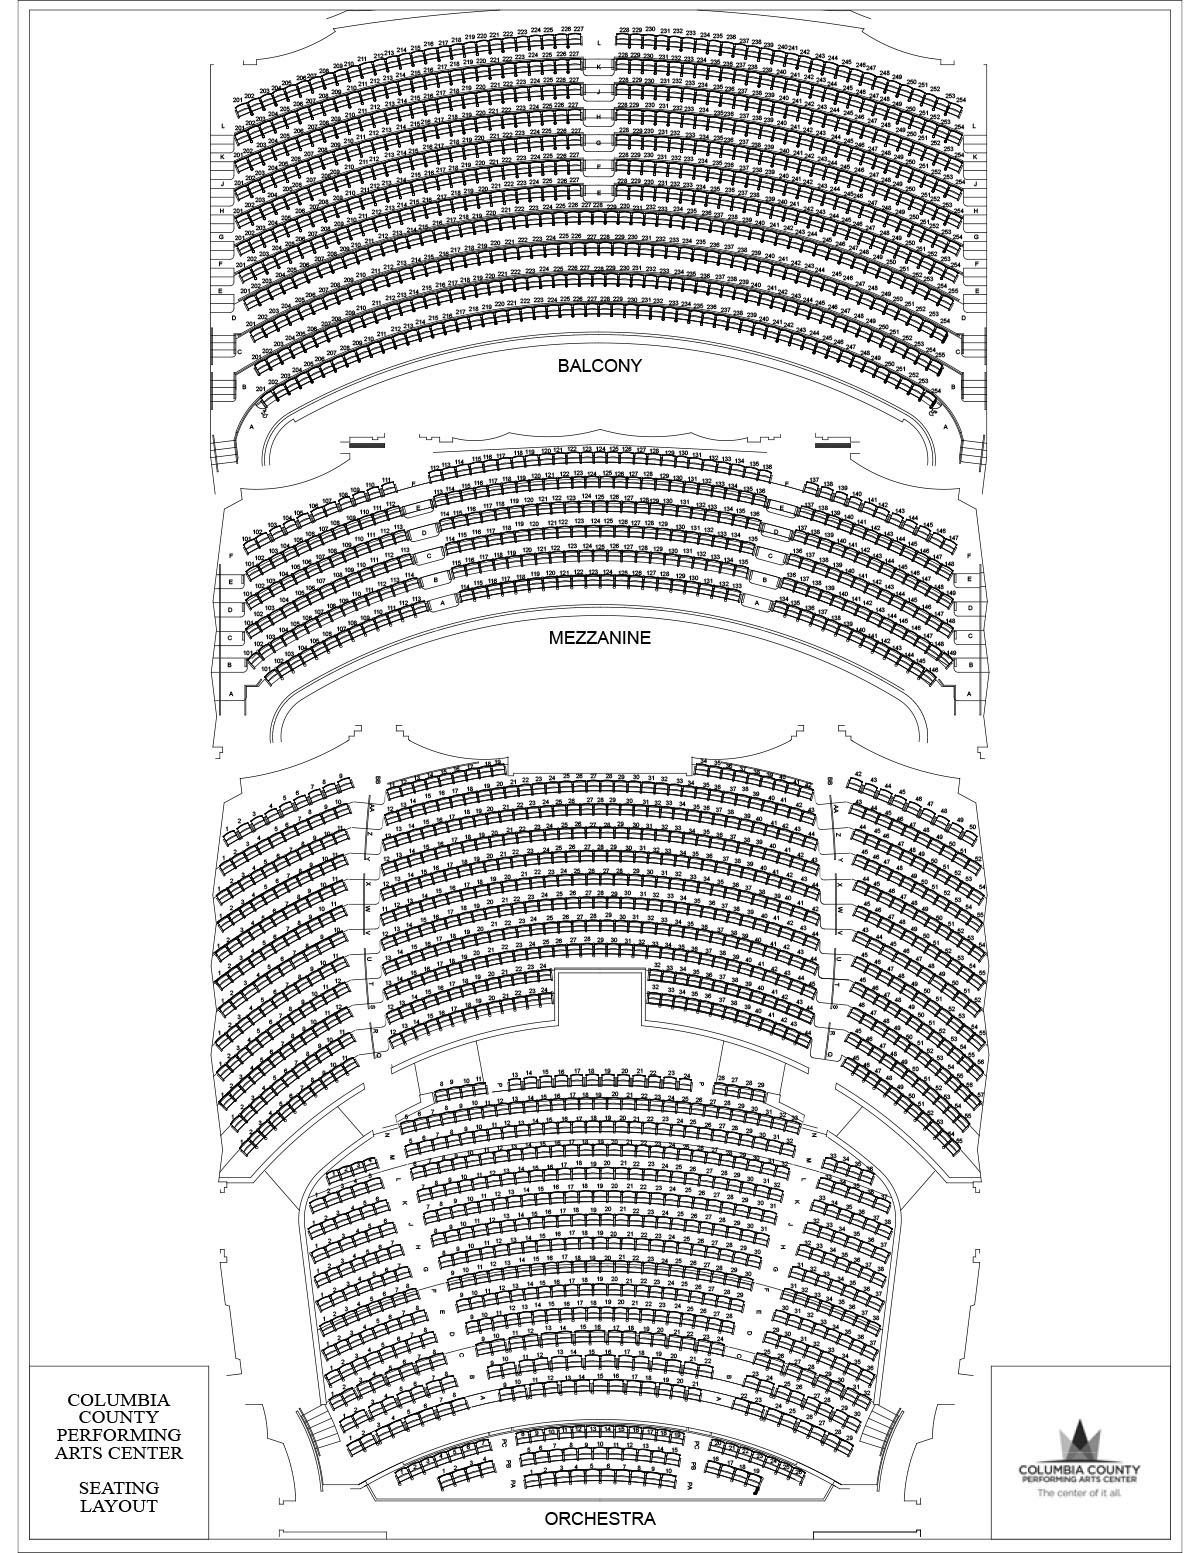 ccpac seating layout